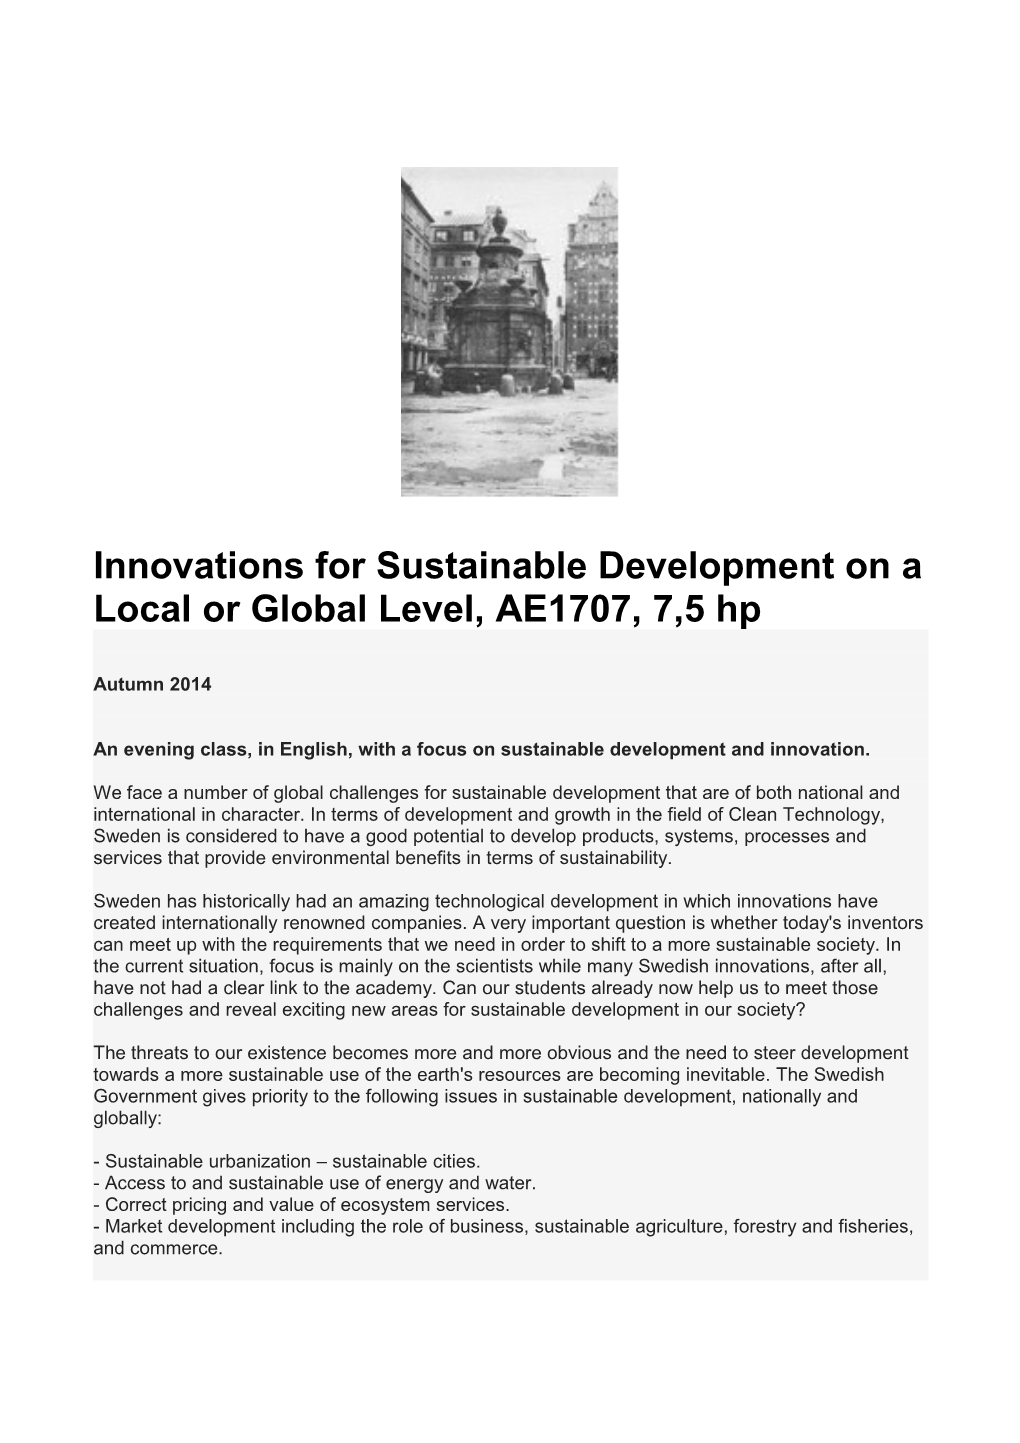 Innovations for Sustainable Development on a Local Or Global Level, AE1707, 7,5 Hp